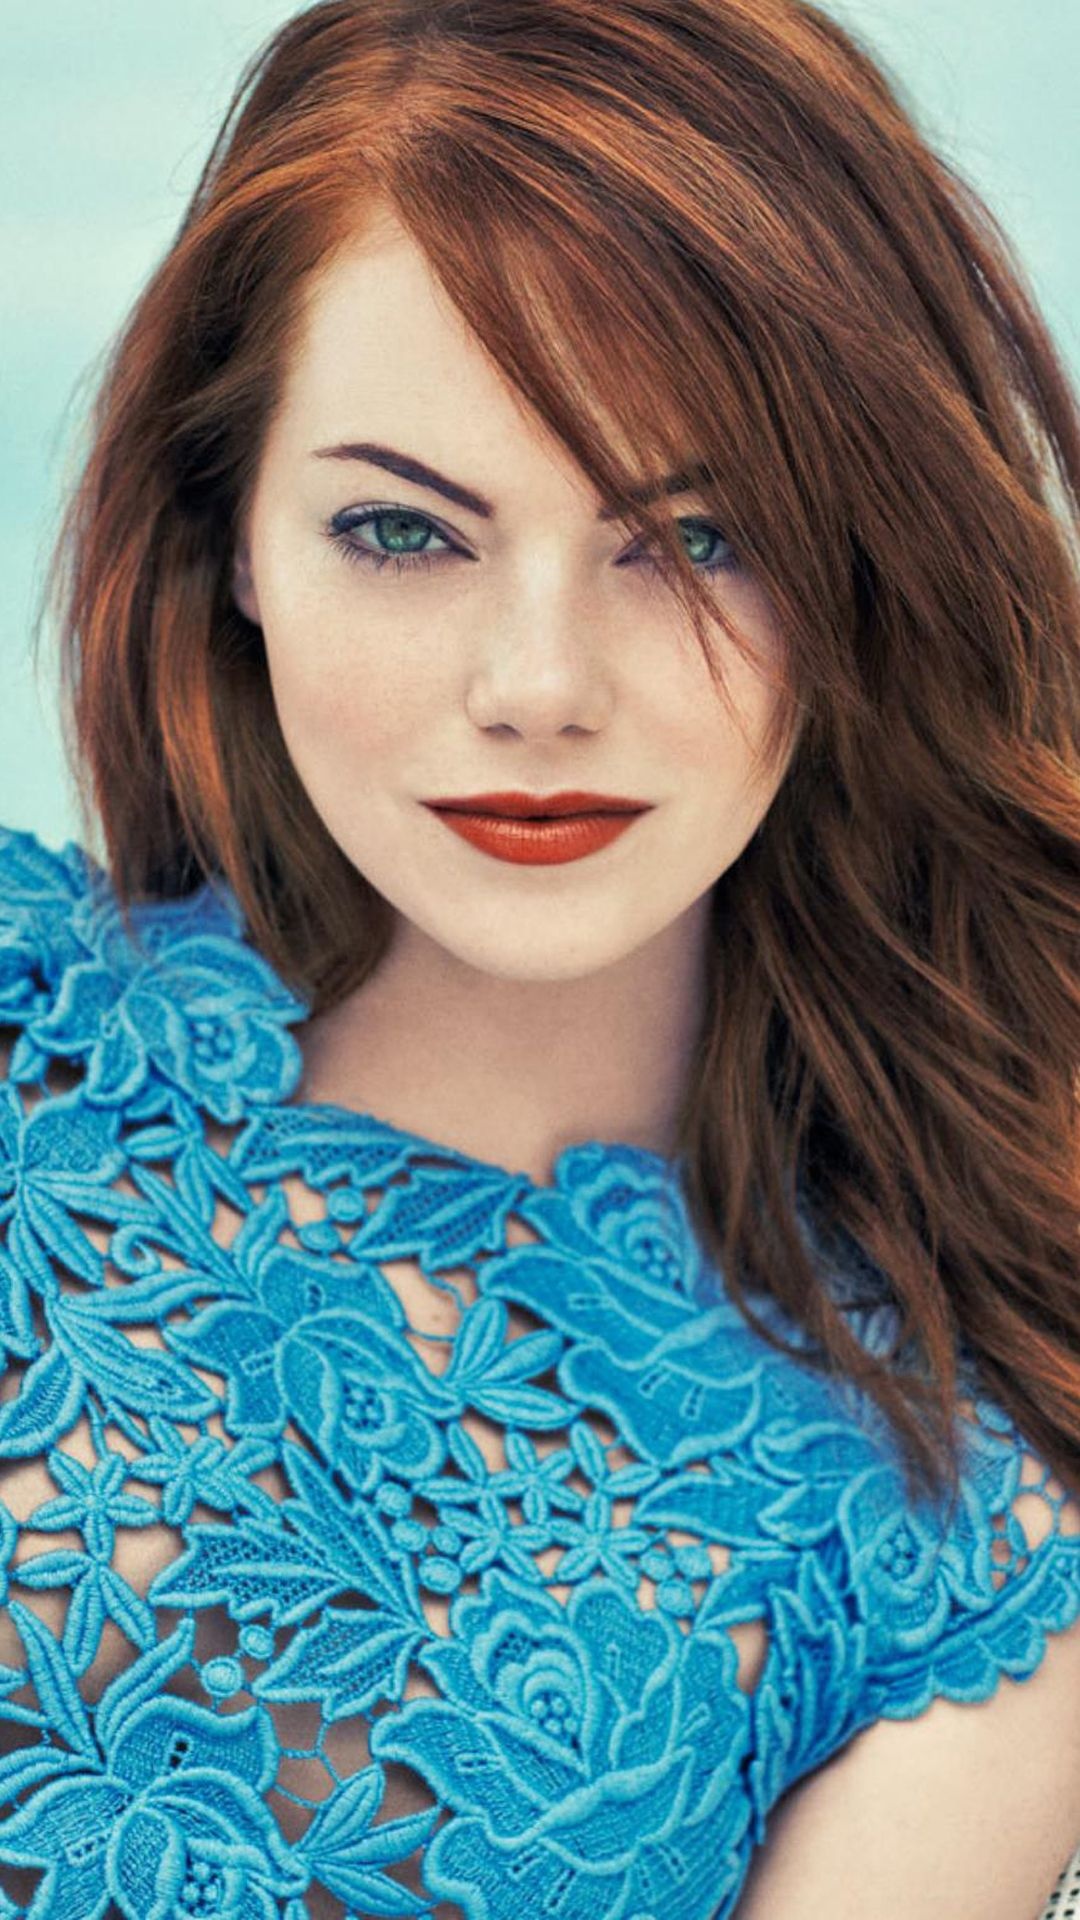 Emma Stone movies, iPhone wallpapers, Celebrities' beauty, Stylish backgrounds, 1080x1920 Full HD Phone